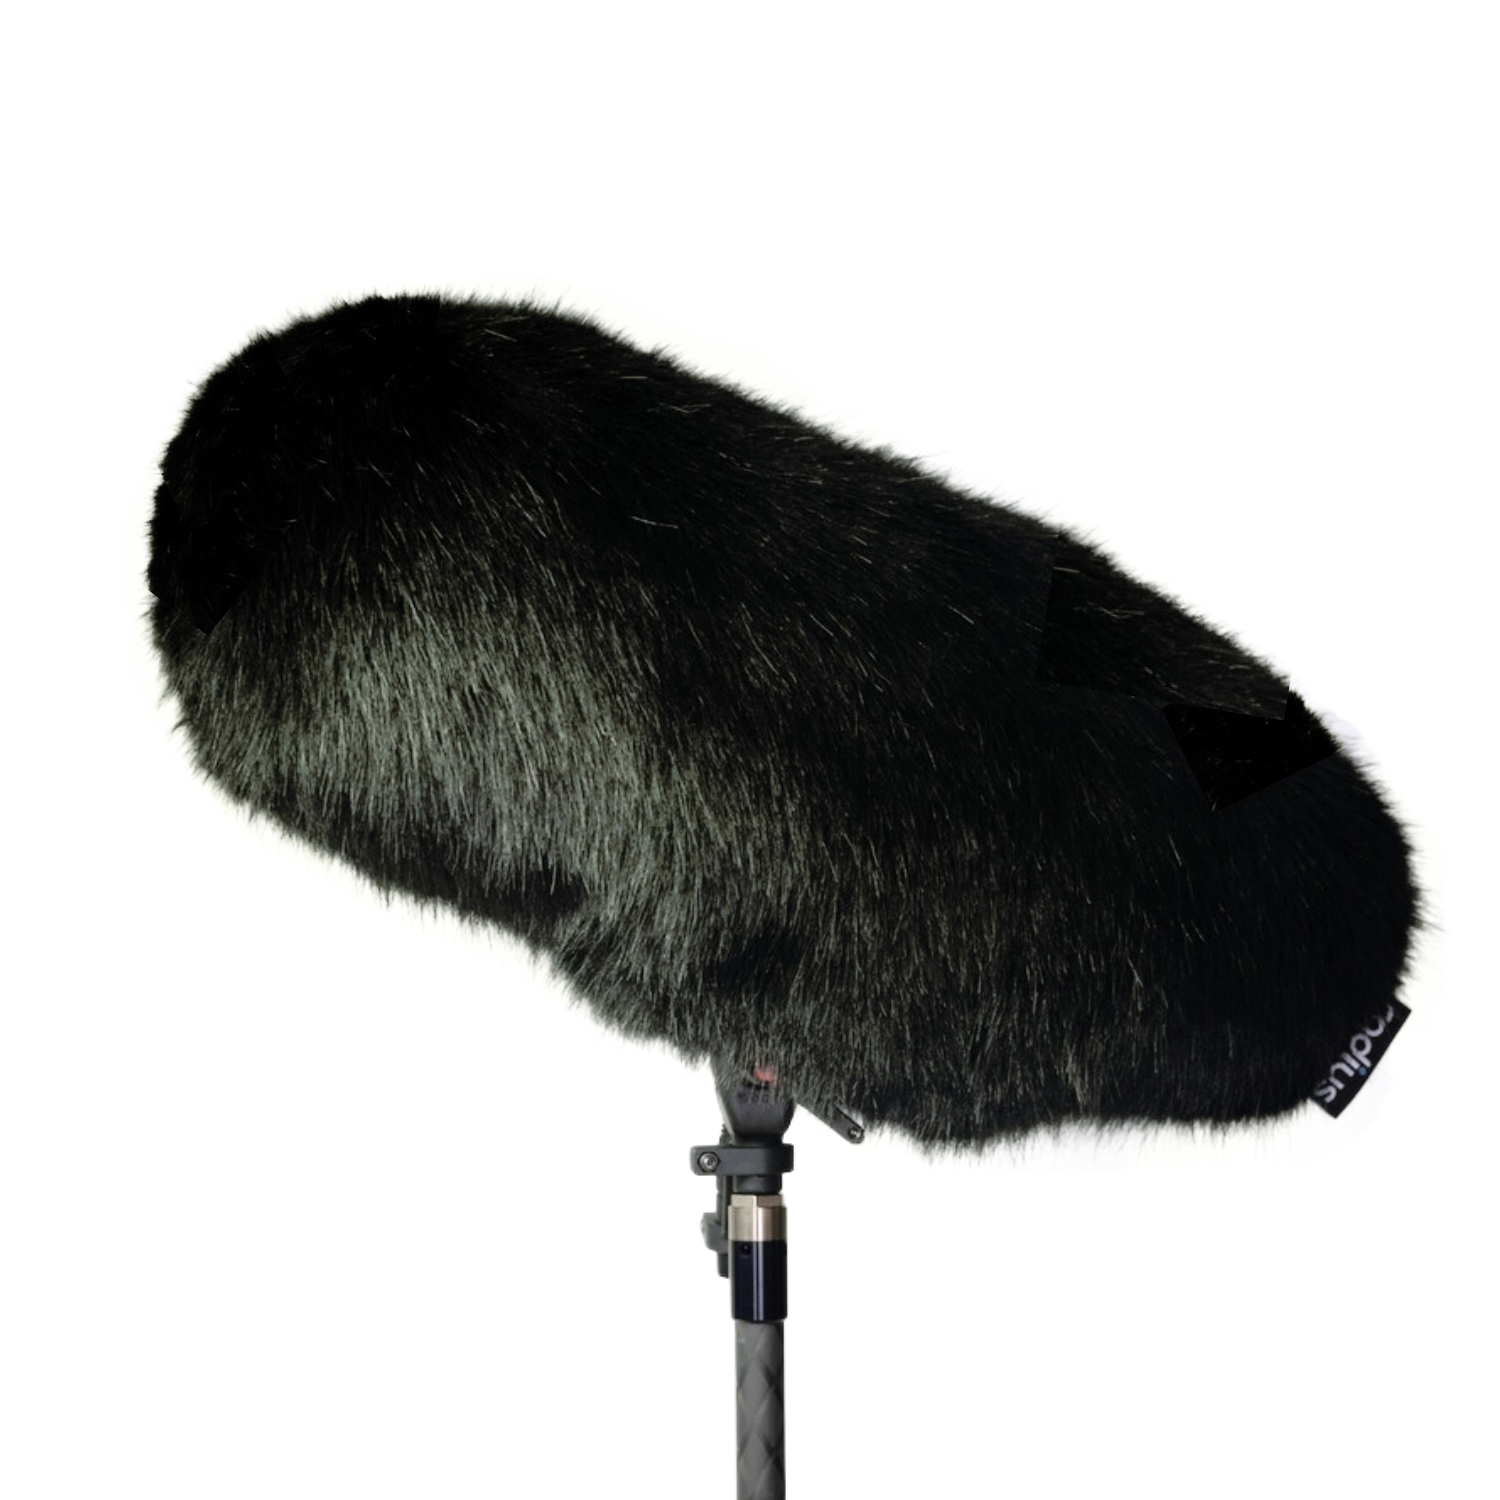 Replacement Windcover for Rycote Cyclone, Medium, Black Fur